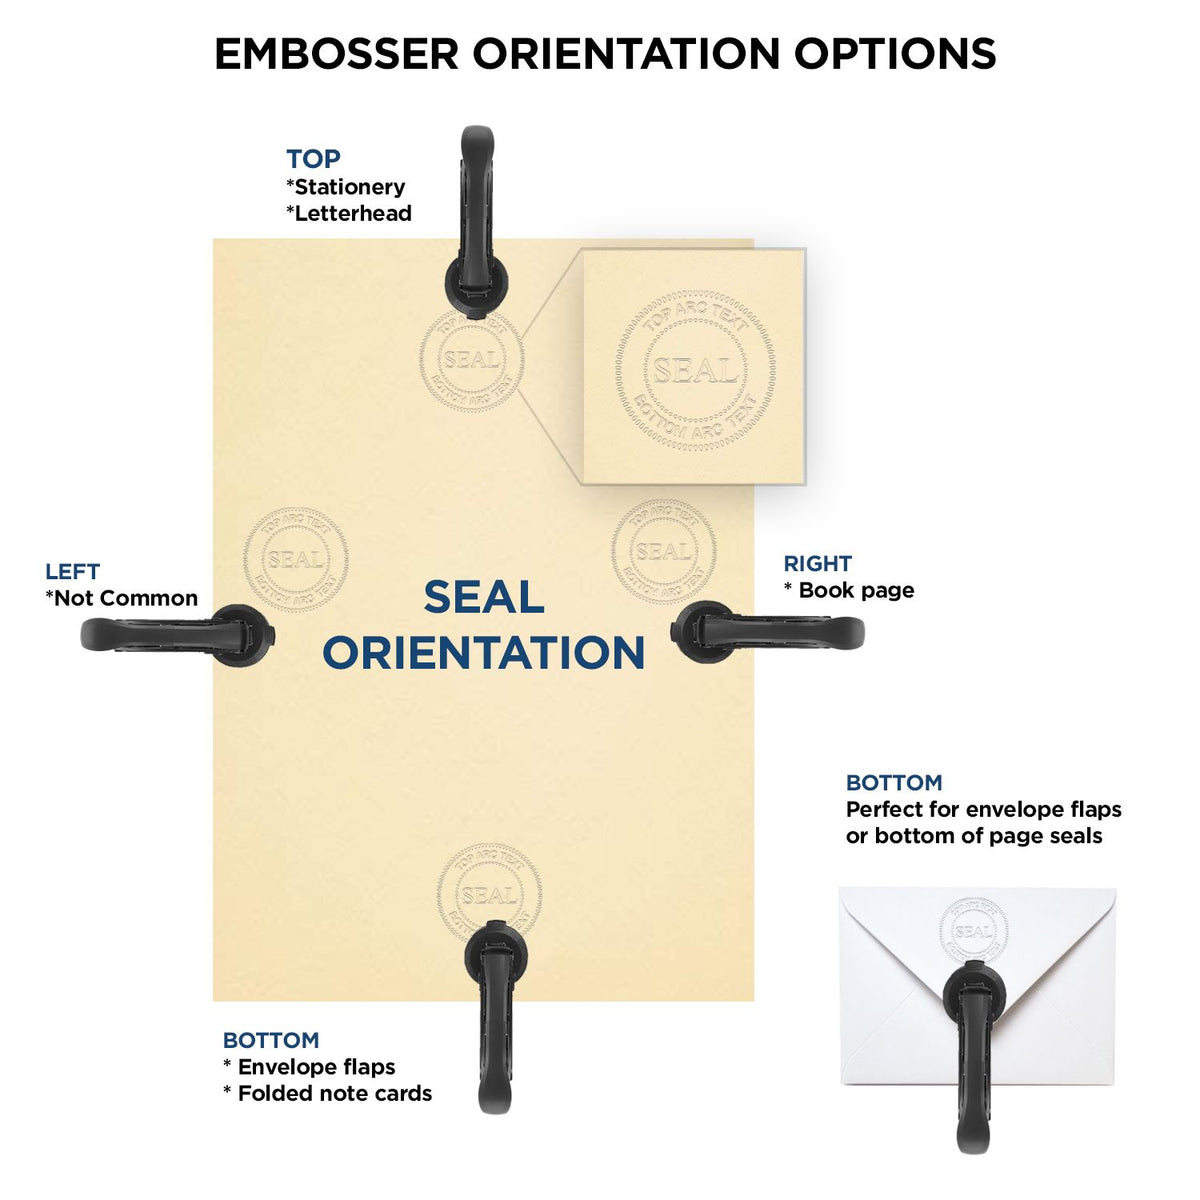 An infographic for the Soft North Dakota Professional Engineer Seal showing embosser orientation, this is showing examples of a top, bottom, right and left insert.